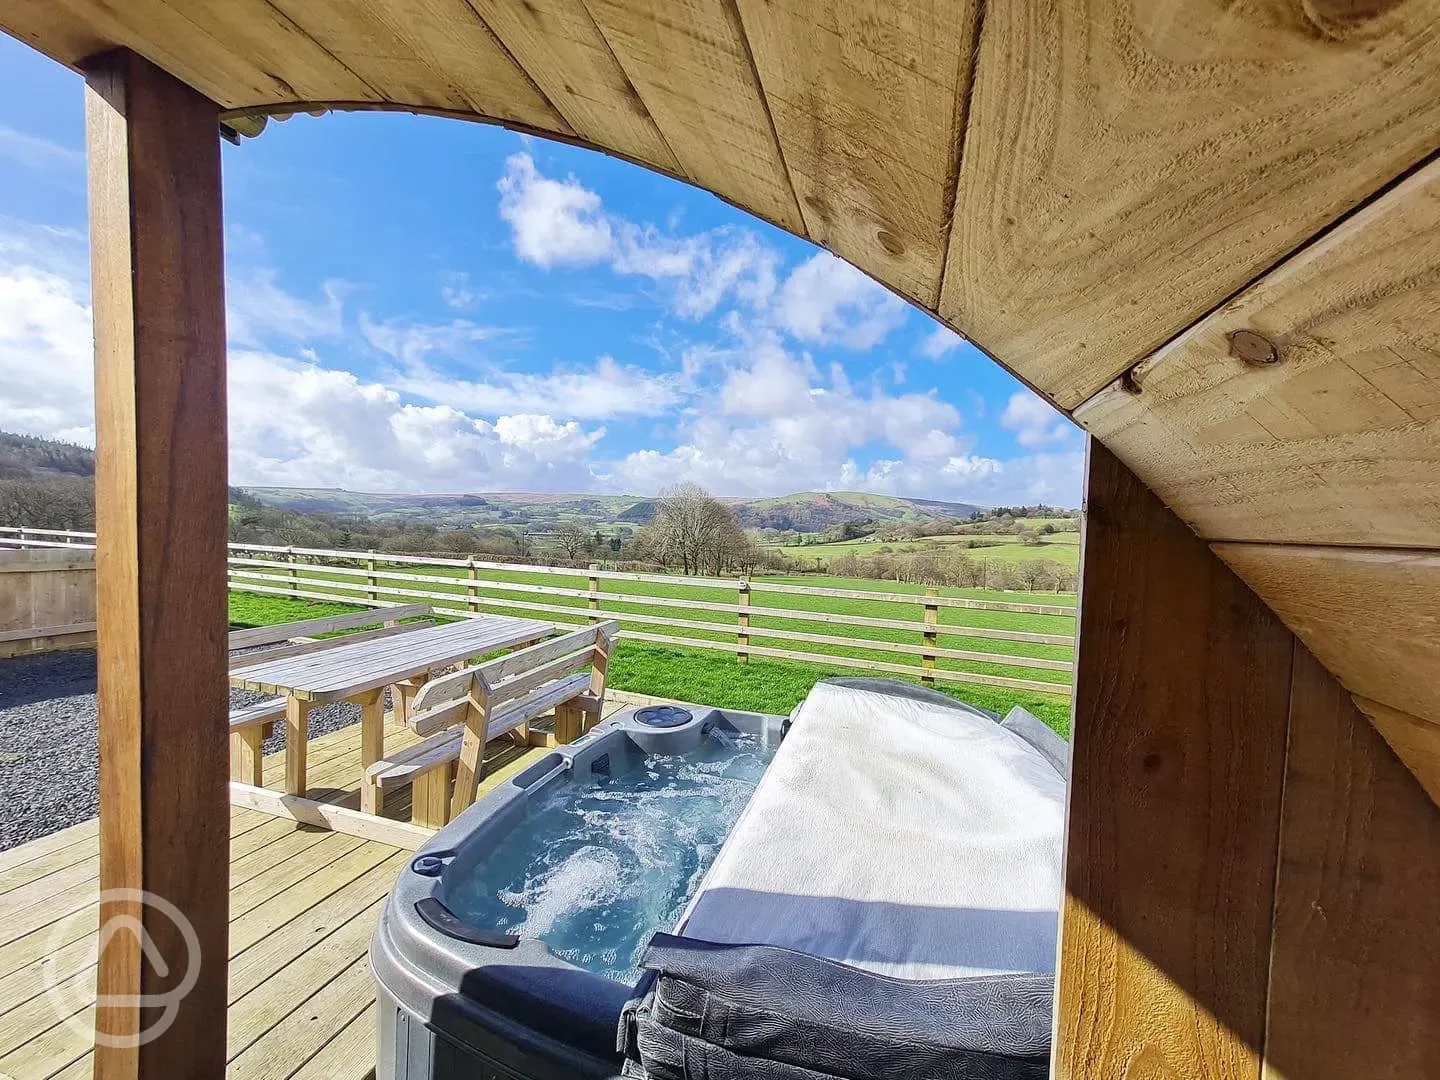 View from the glamping cabin's hot tub